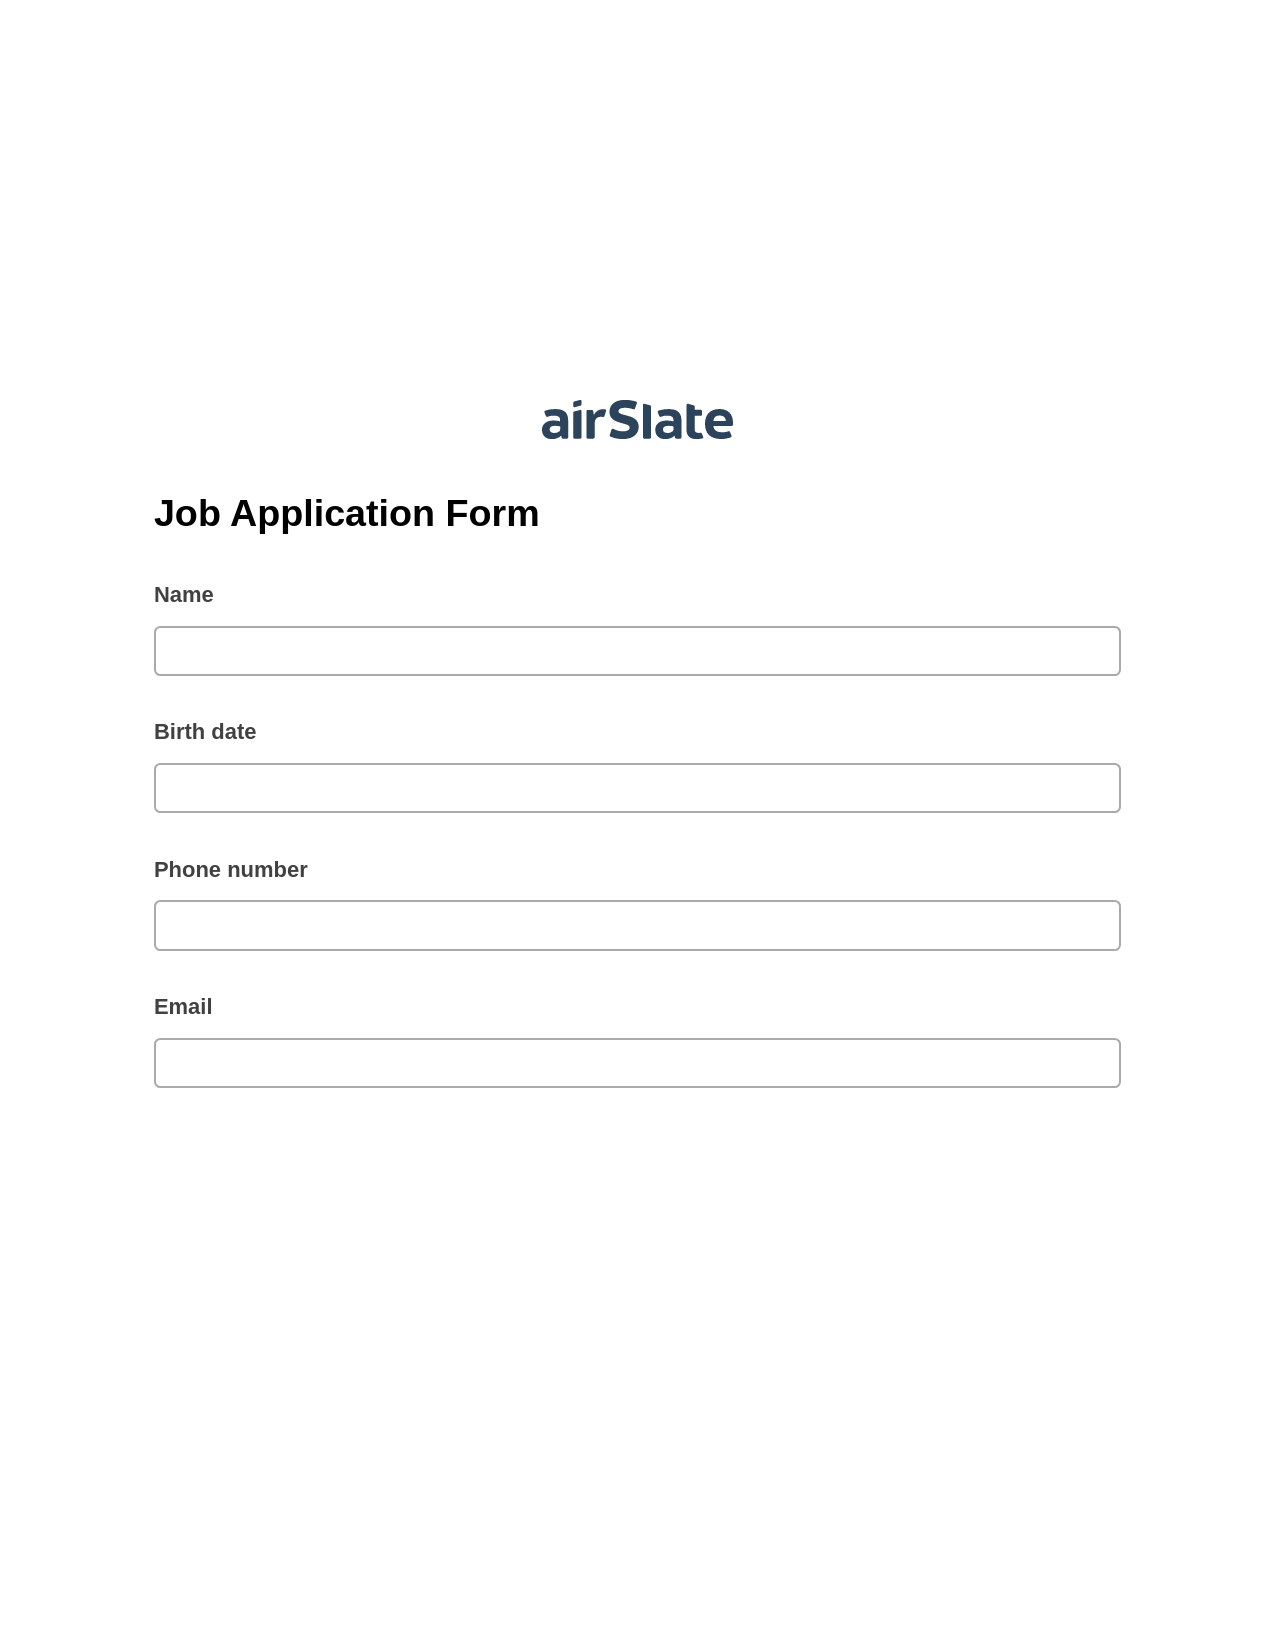 Job Application Form Pre-fill from Google Sheet Dropdown Options Bot, Email Notification Bot, Export to MySQL Bot